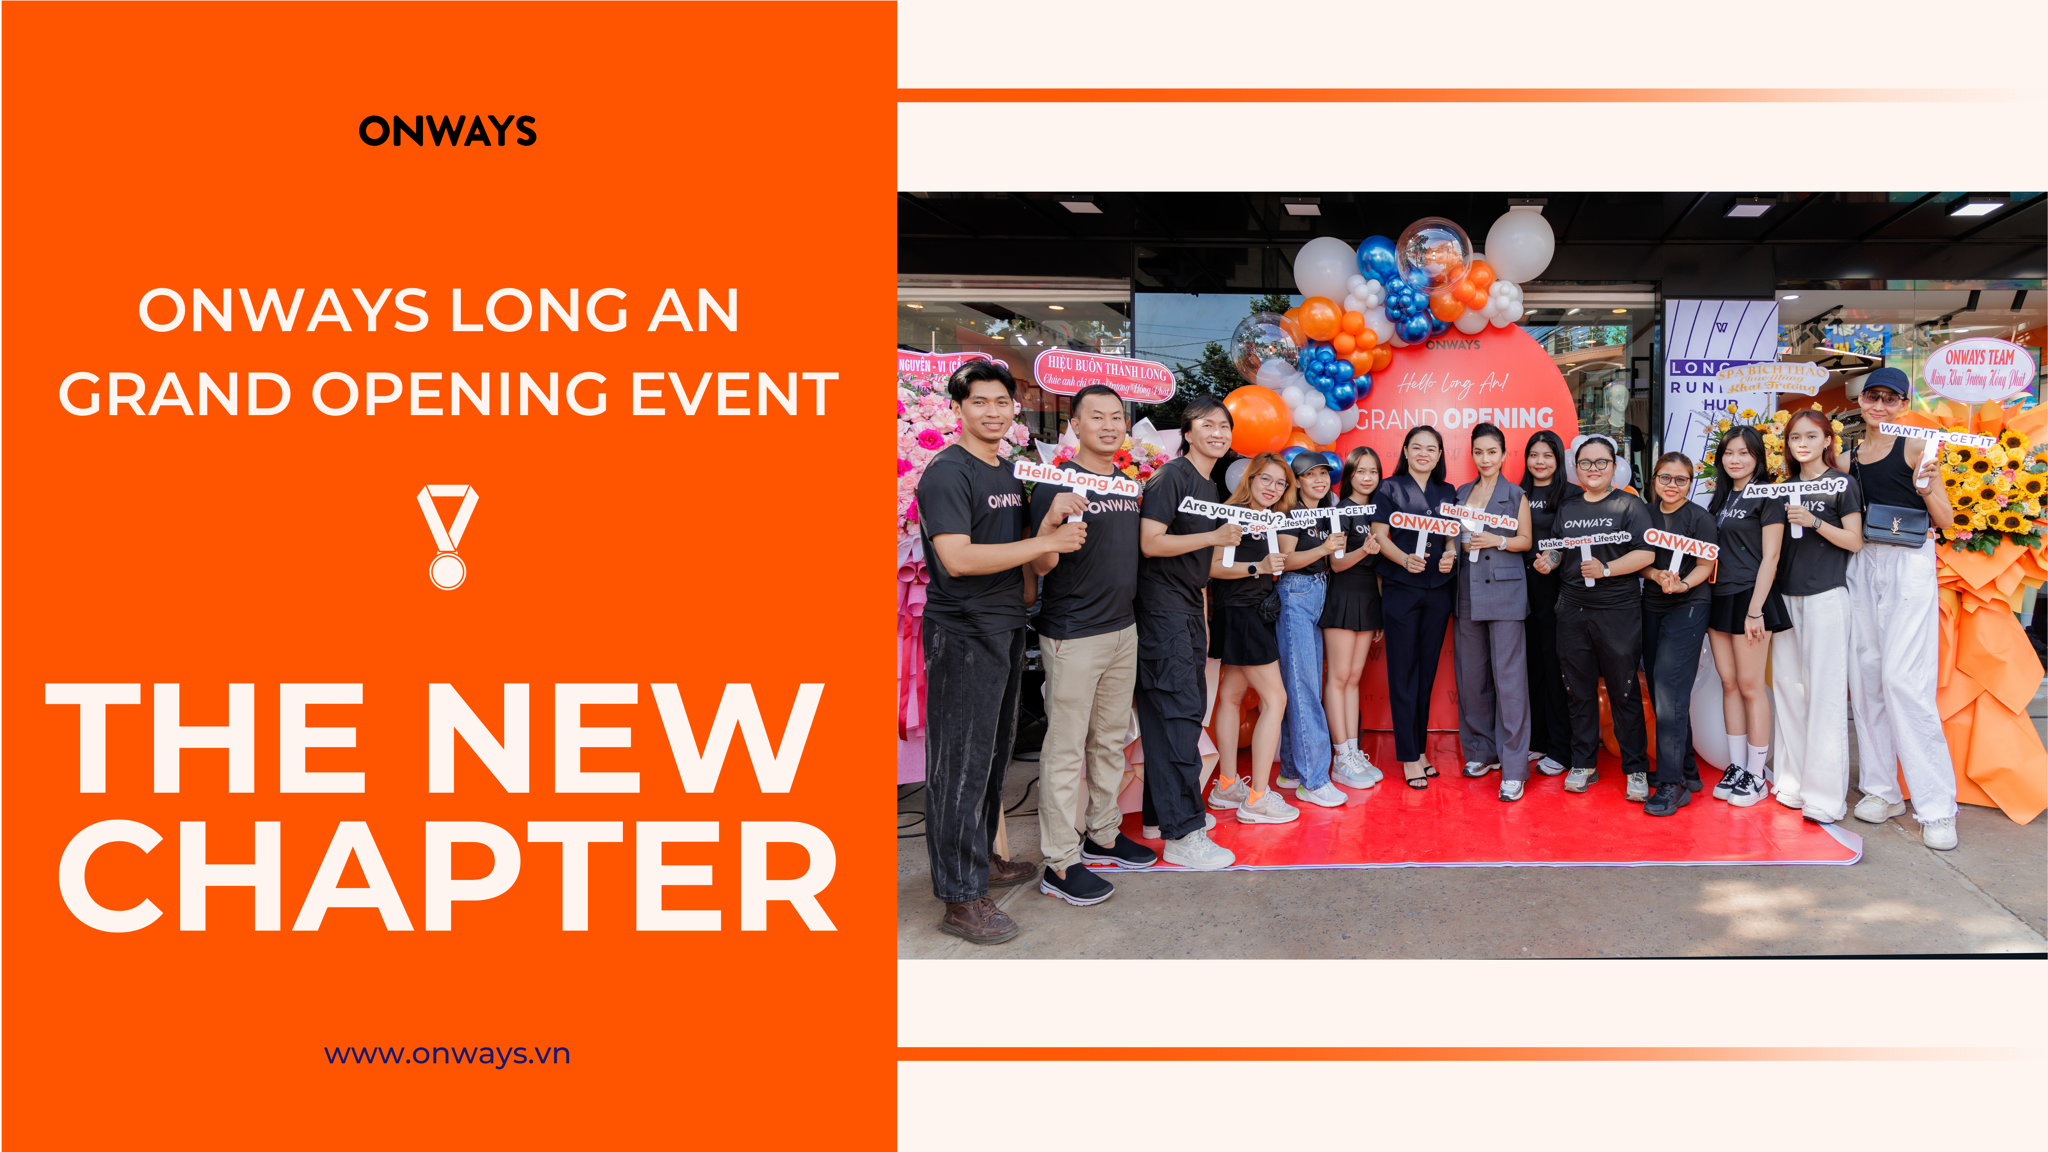 ONWAYS LONG AN GRAND OPENING EVENT - THE NEW CHAPTER 🏅